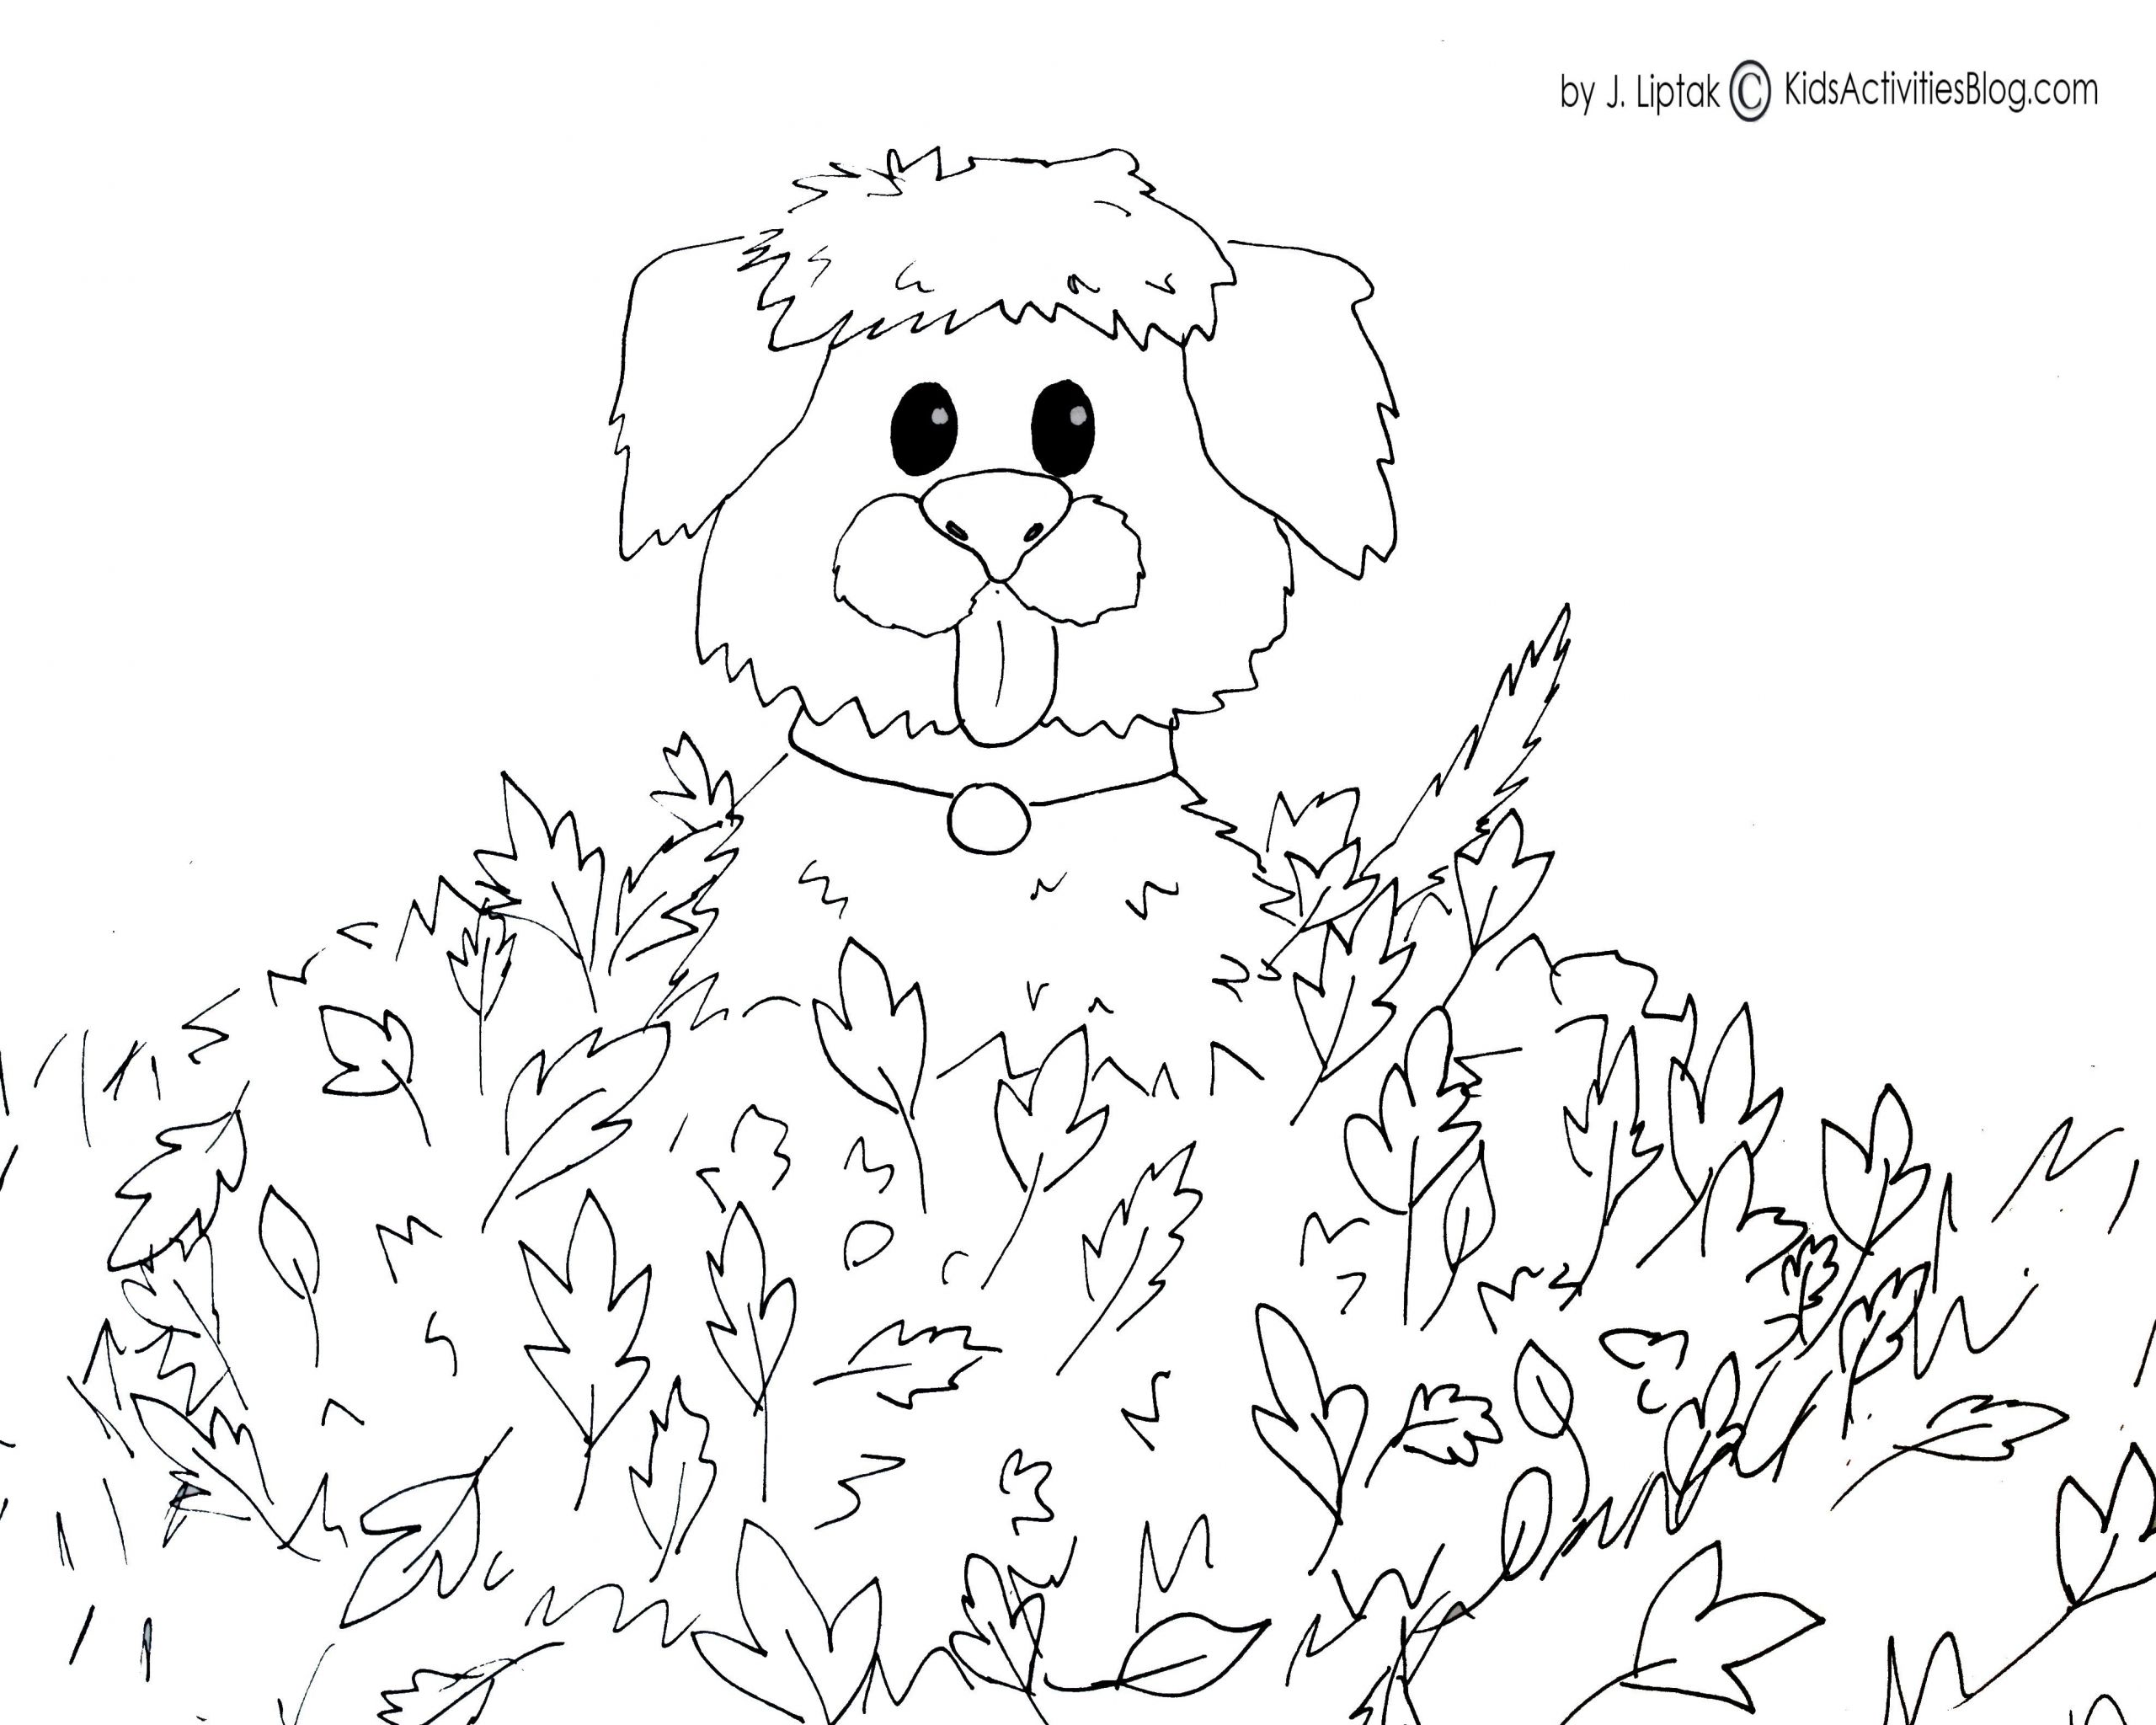 Fall Kids Coloring Pages
 4 FREE PRINTABLE FALL COLORING PAGES Kids Activities